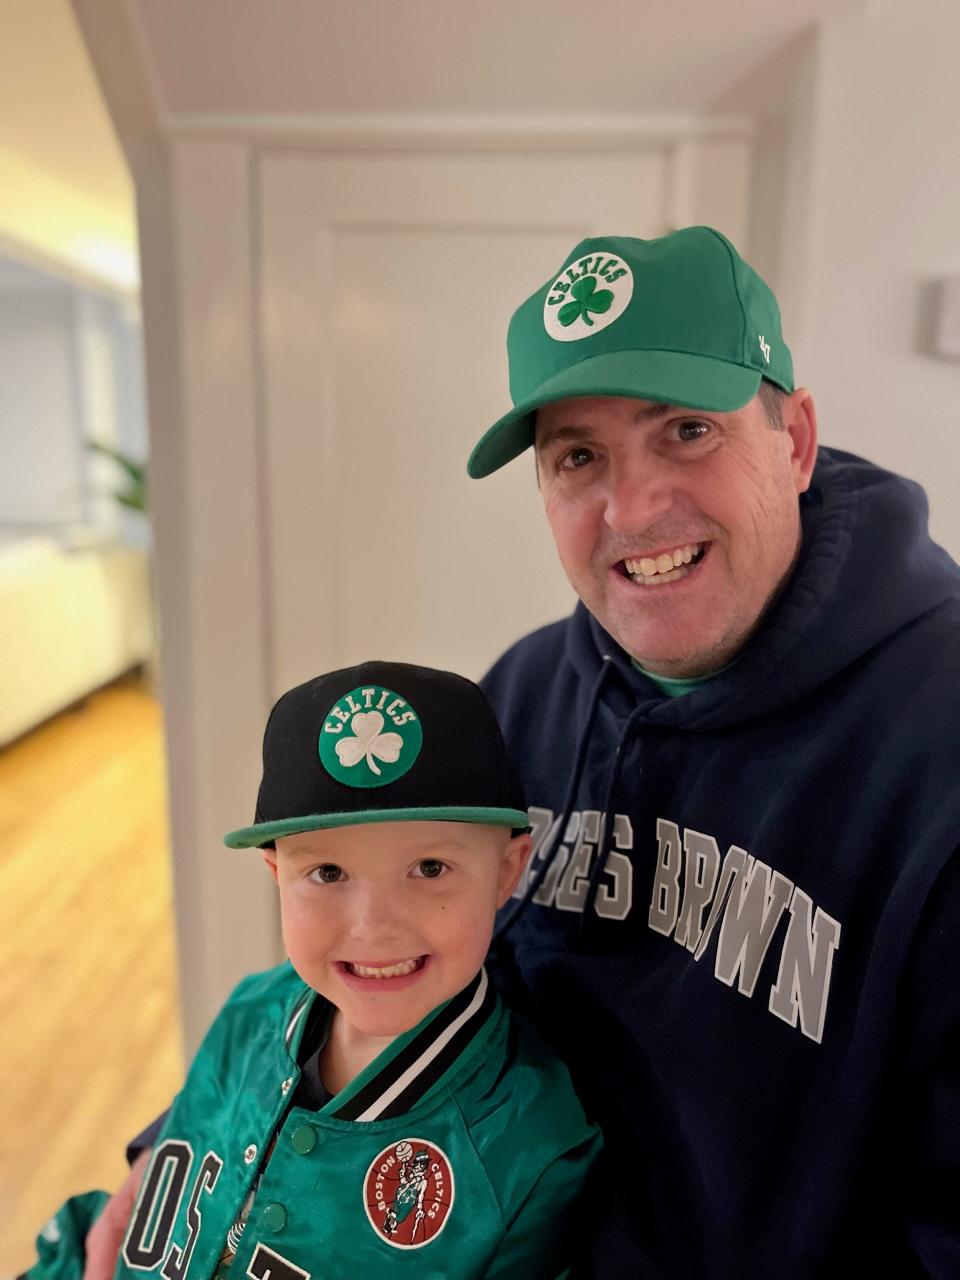 Liam Chapman, who was diagnosed with leukemia in November, doesn't realize how big this basketball tournament on April 6 will be, said his father, Lincoln.